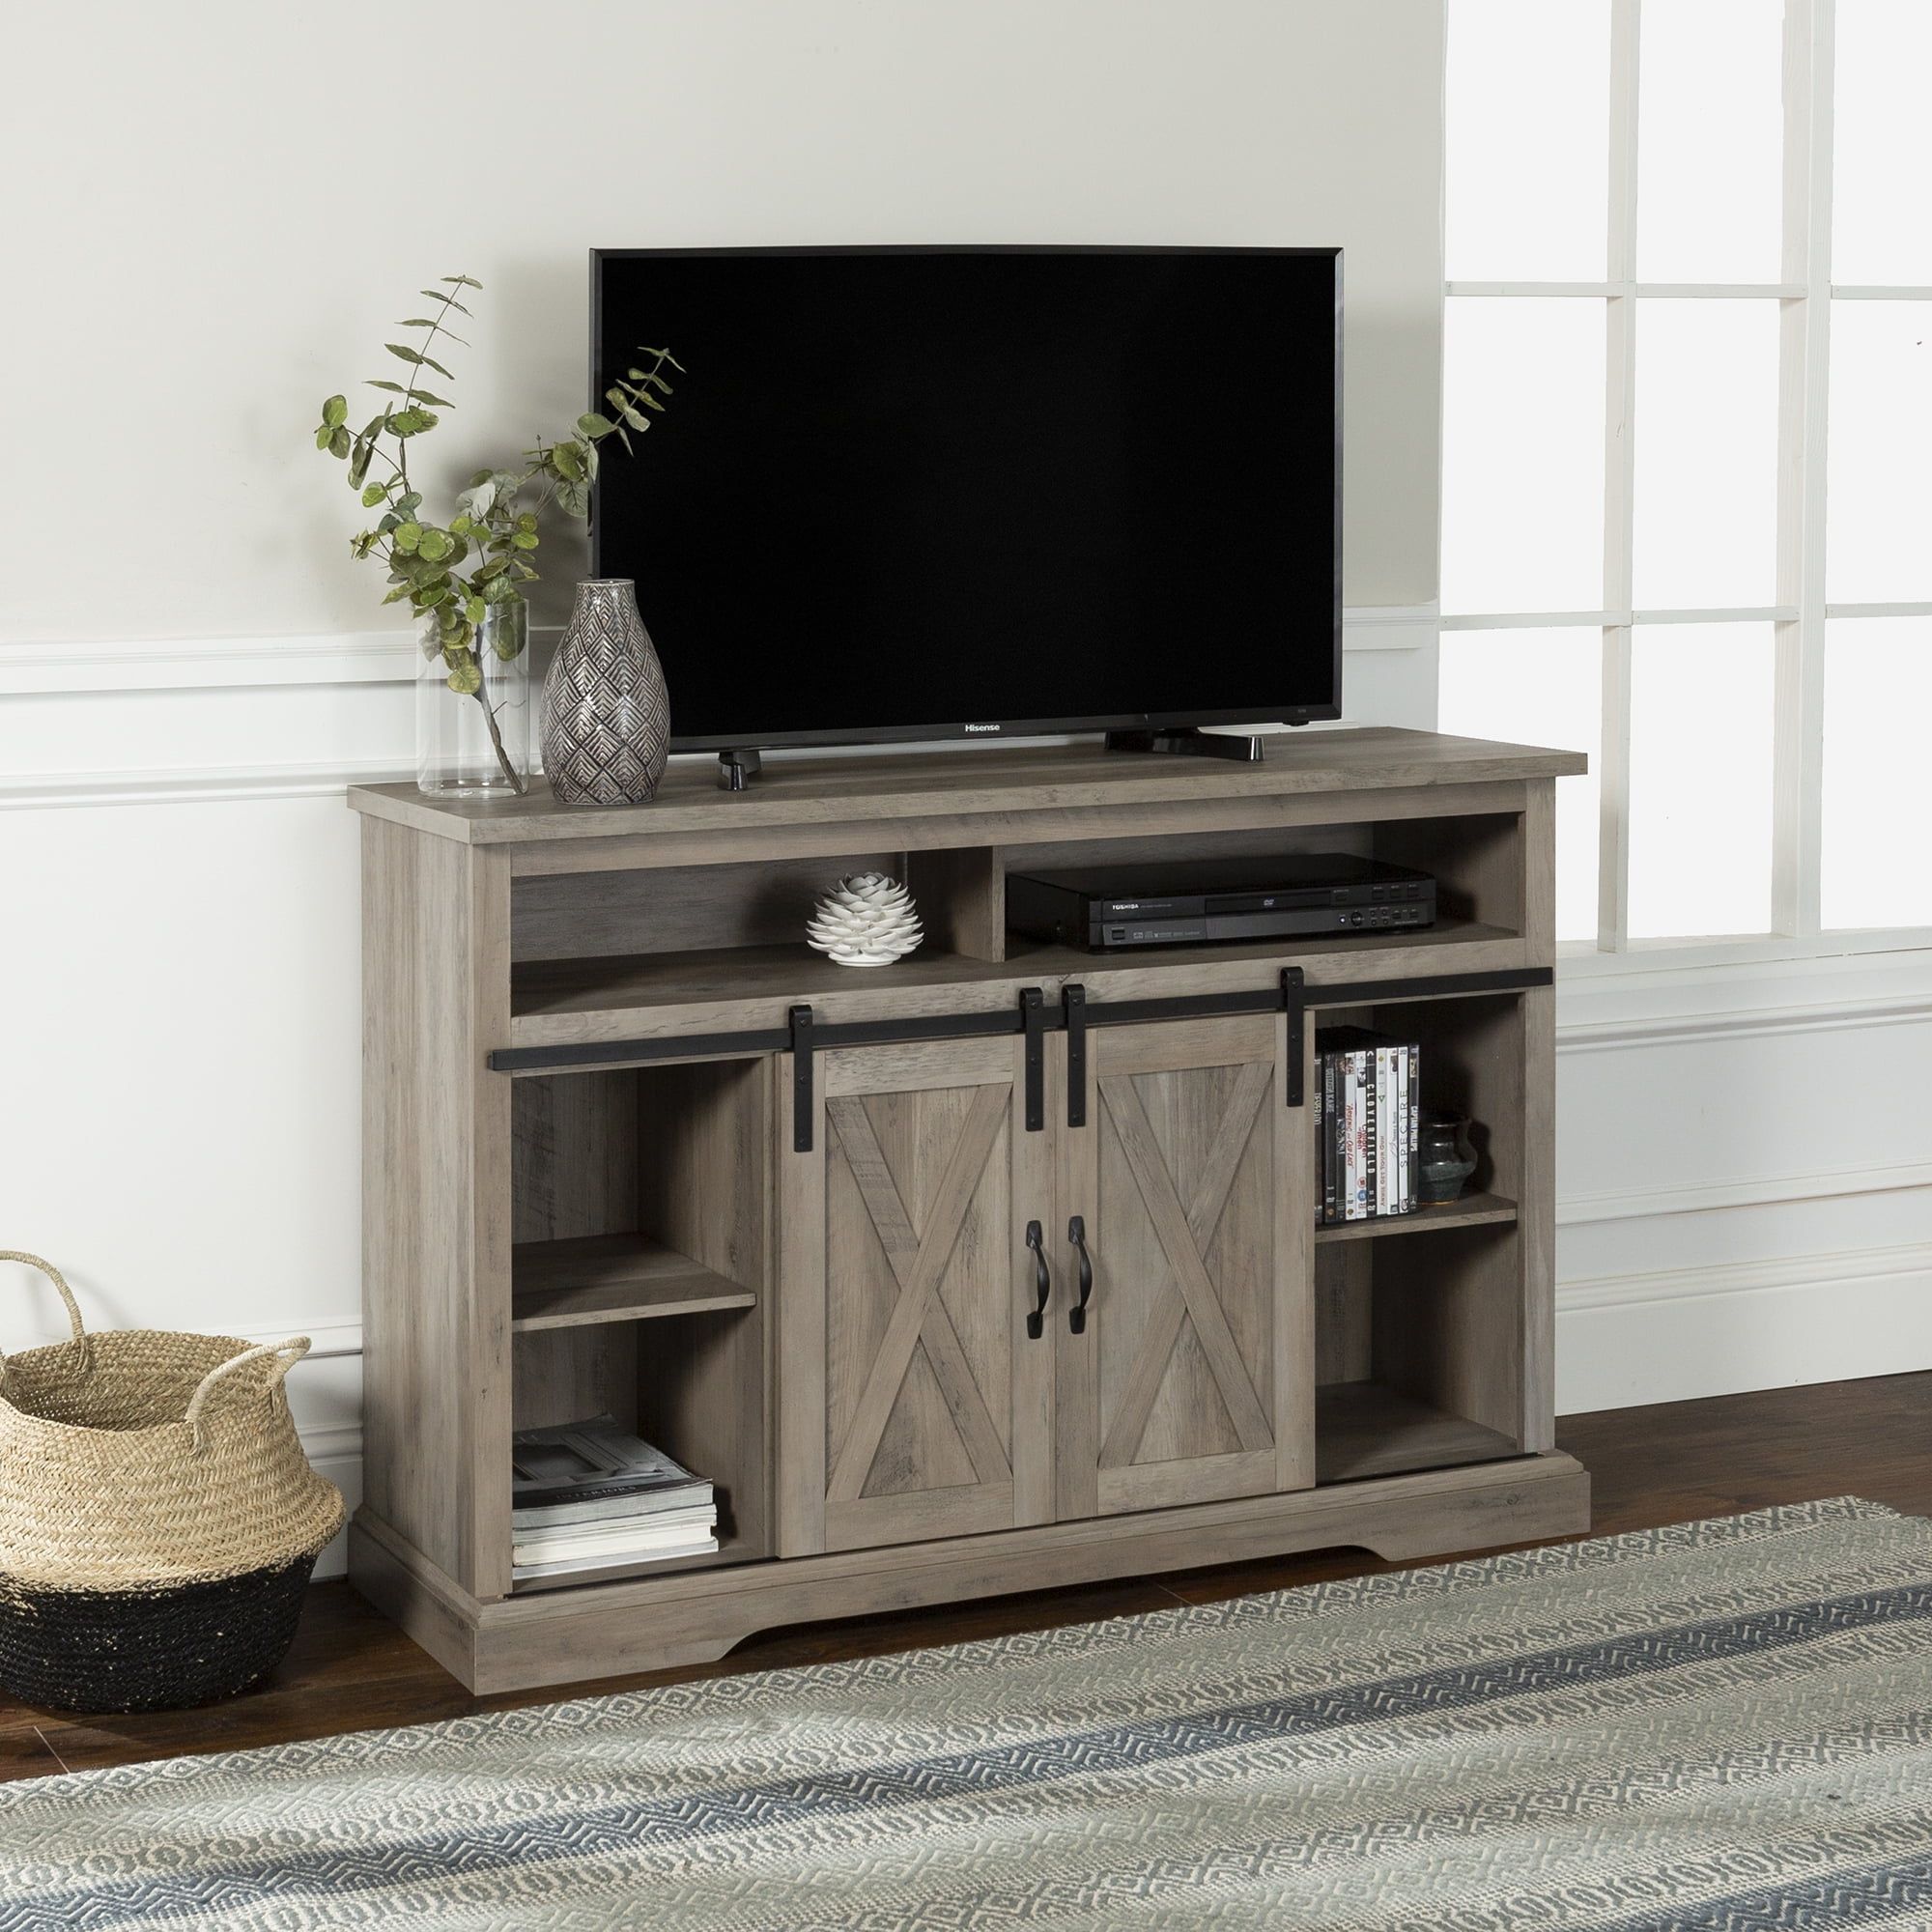 Manor Park Farmhouse Barn Door Tv Stand For Tvs Up To 58", Grey Wash With Regard To Farmhouse Tv Stands (View 17 of 20)